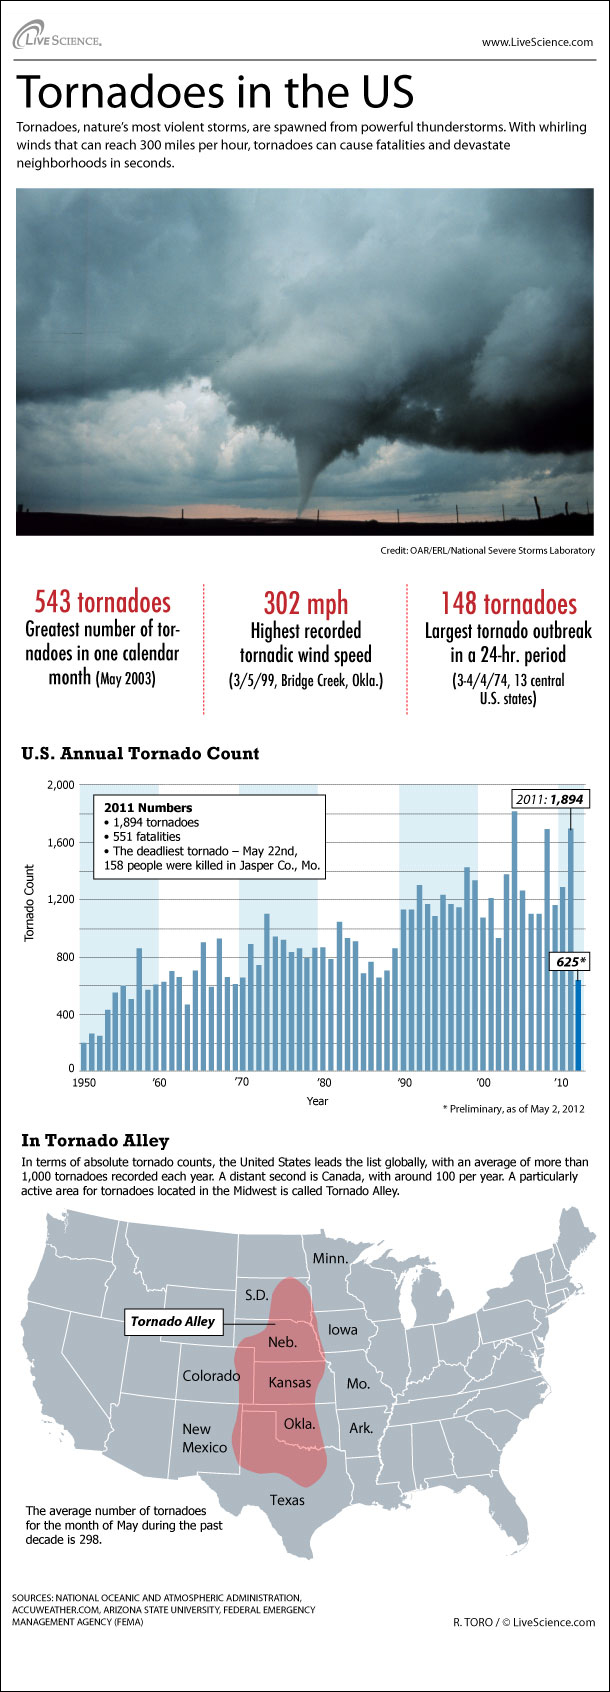 Tornado Alley Map, Stats (Infographic) US Tornadoes Live Science